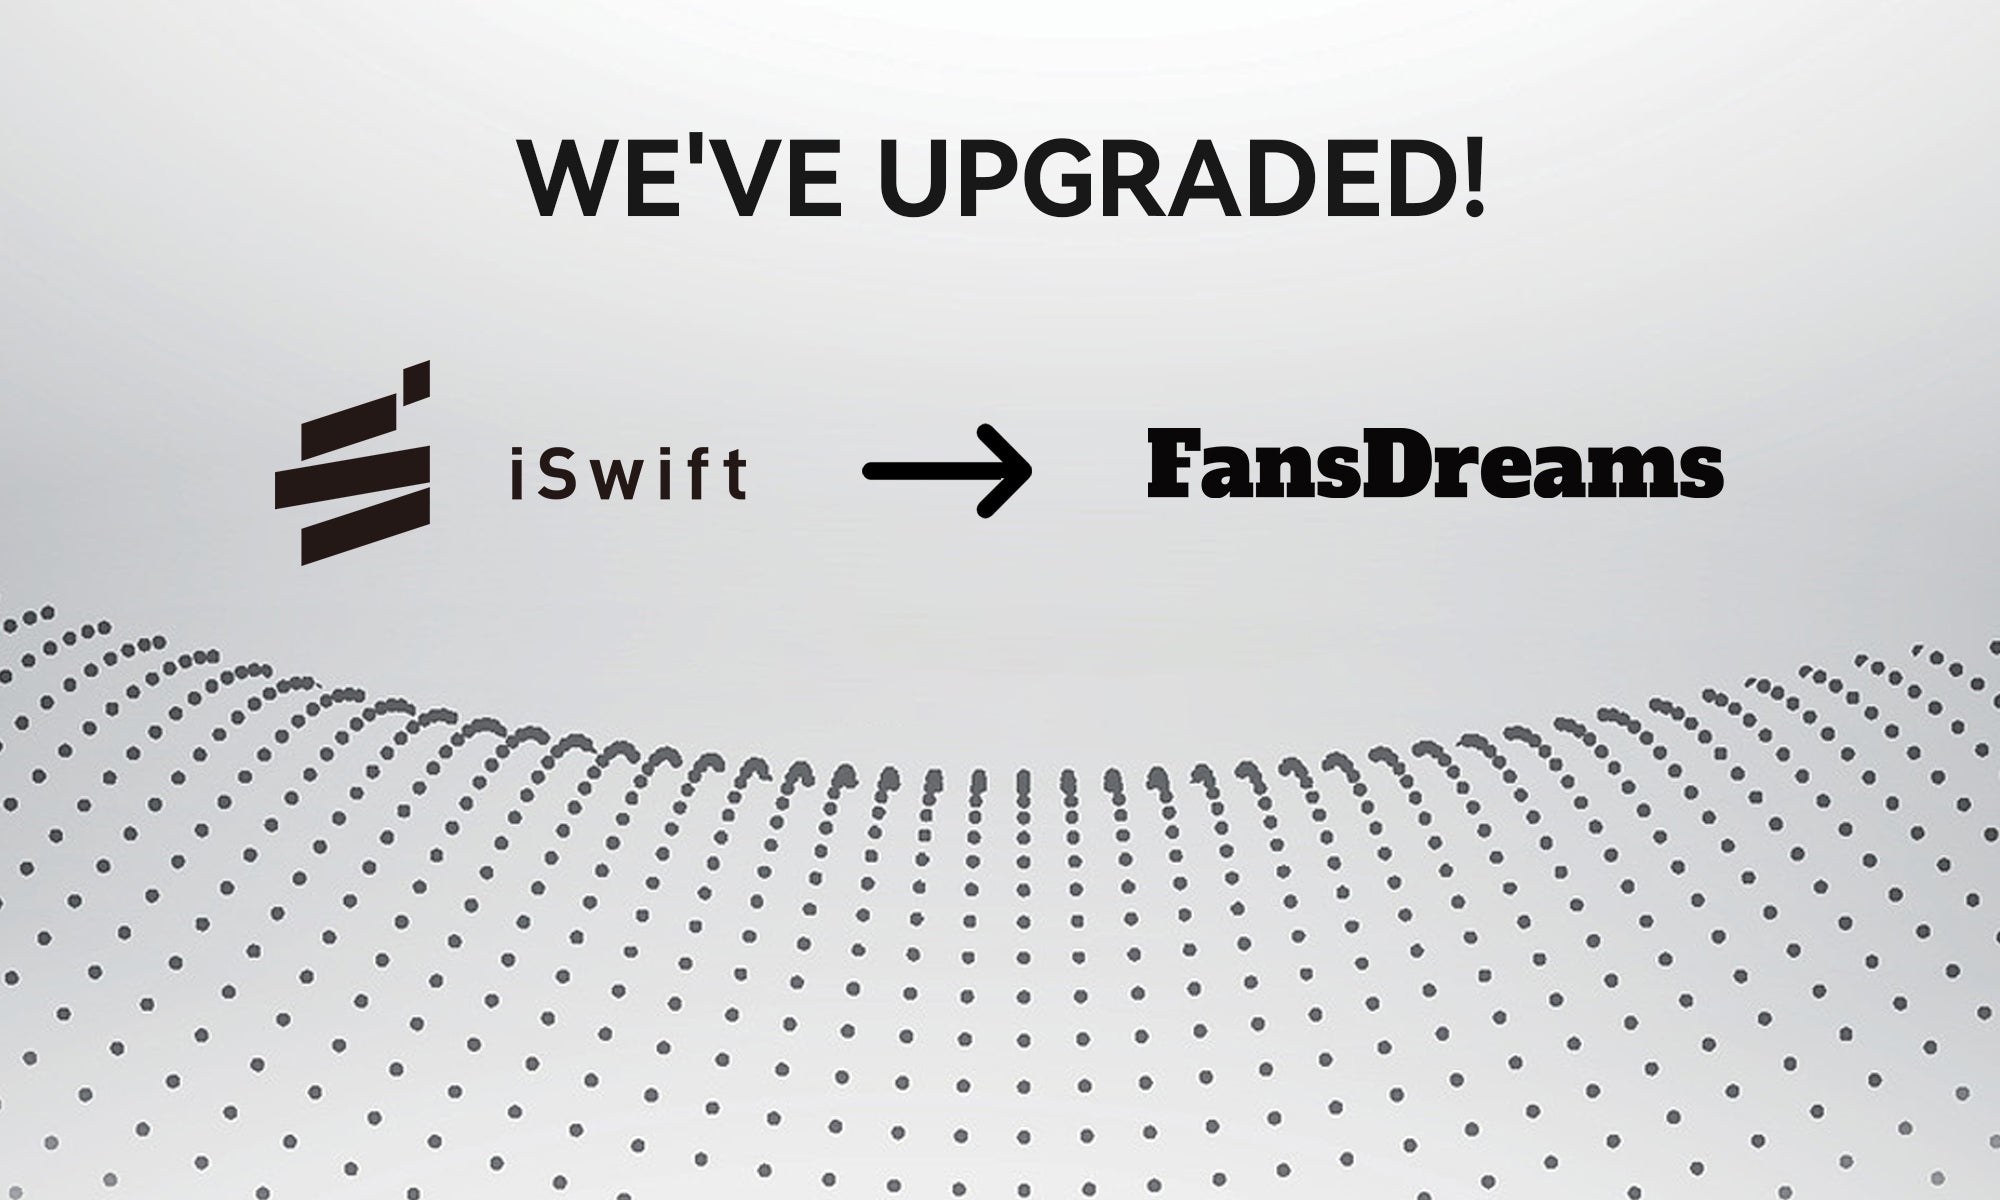 From iSwift to FansDreams - Our New Chapter